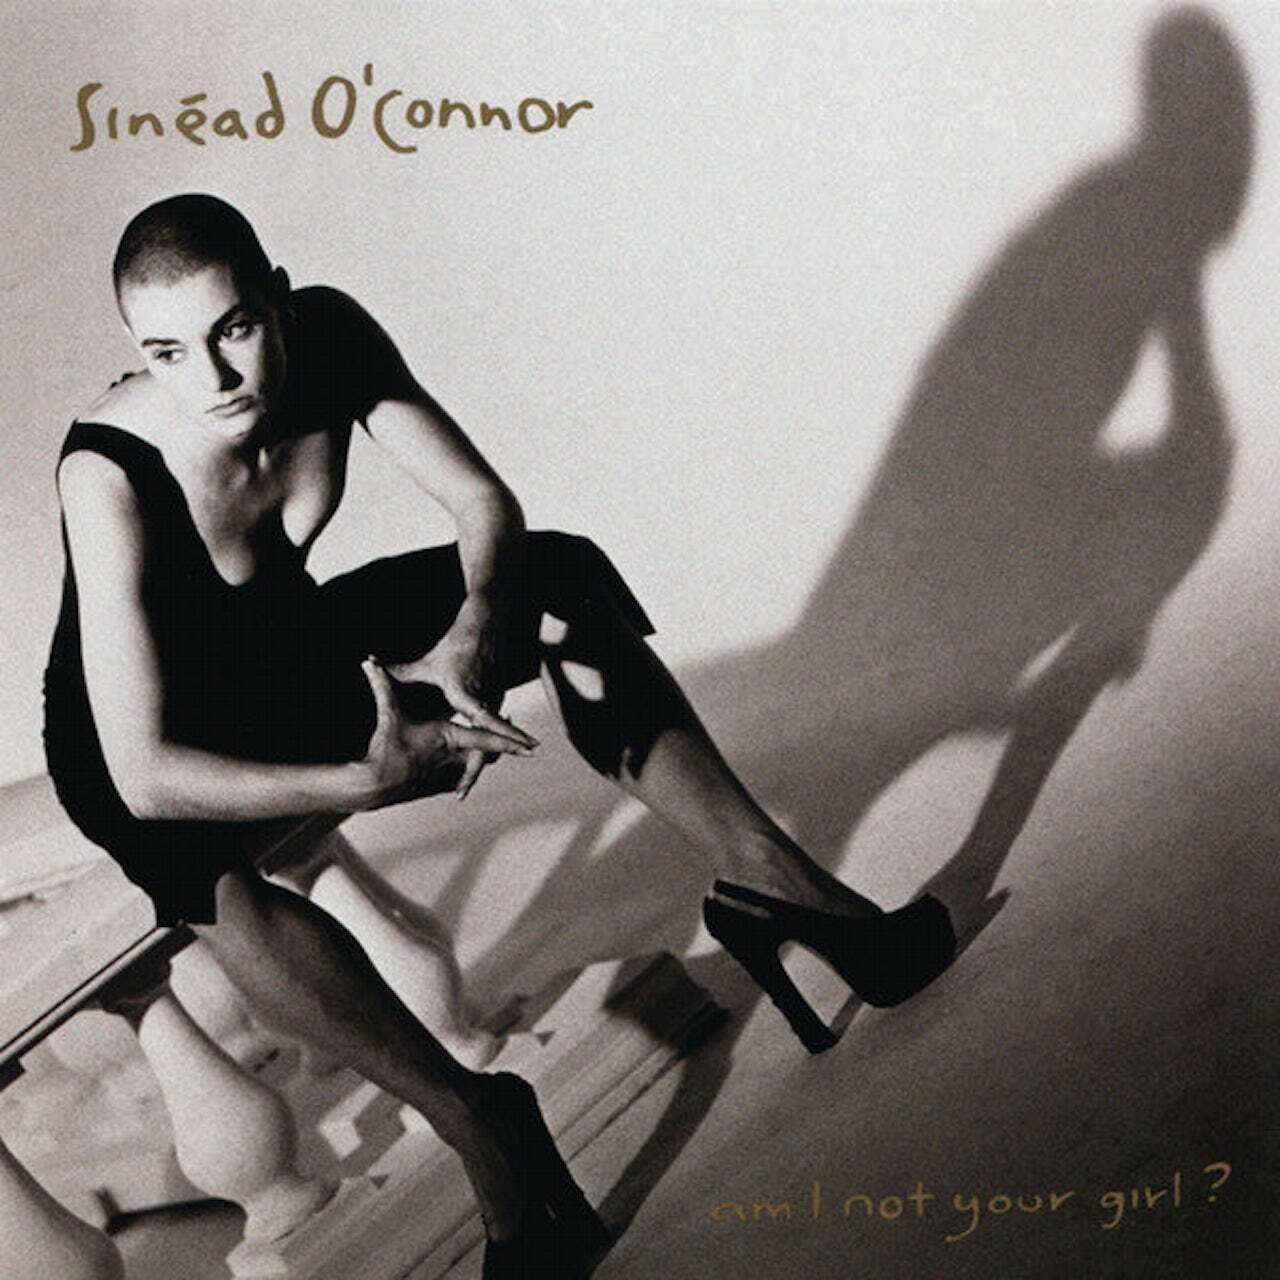 Sinead O'Connor / Am I Not Your Girl?